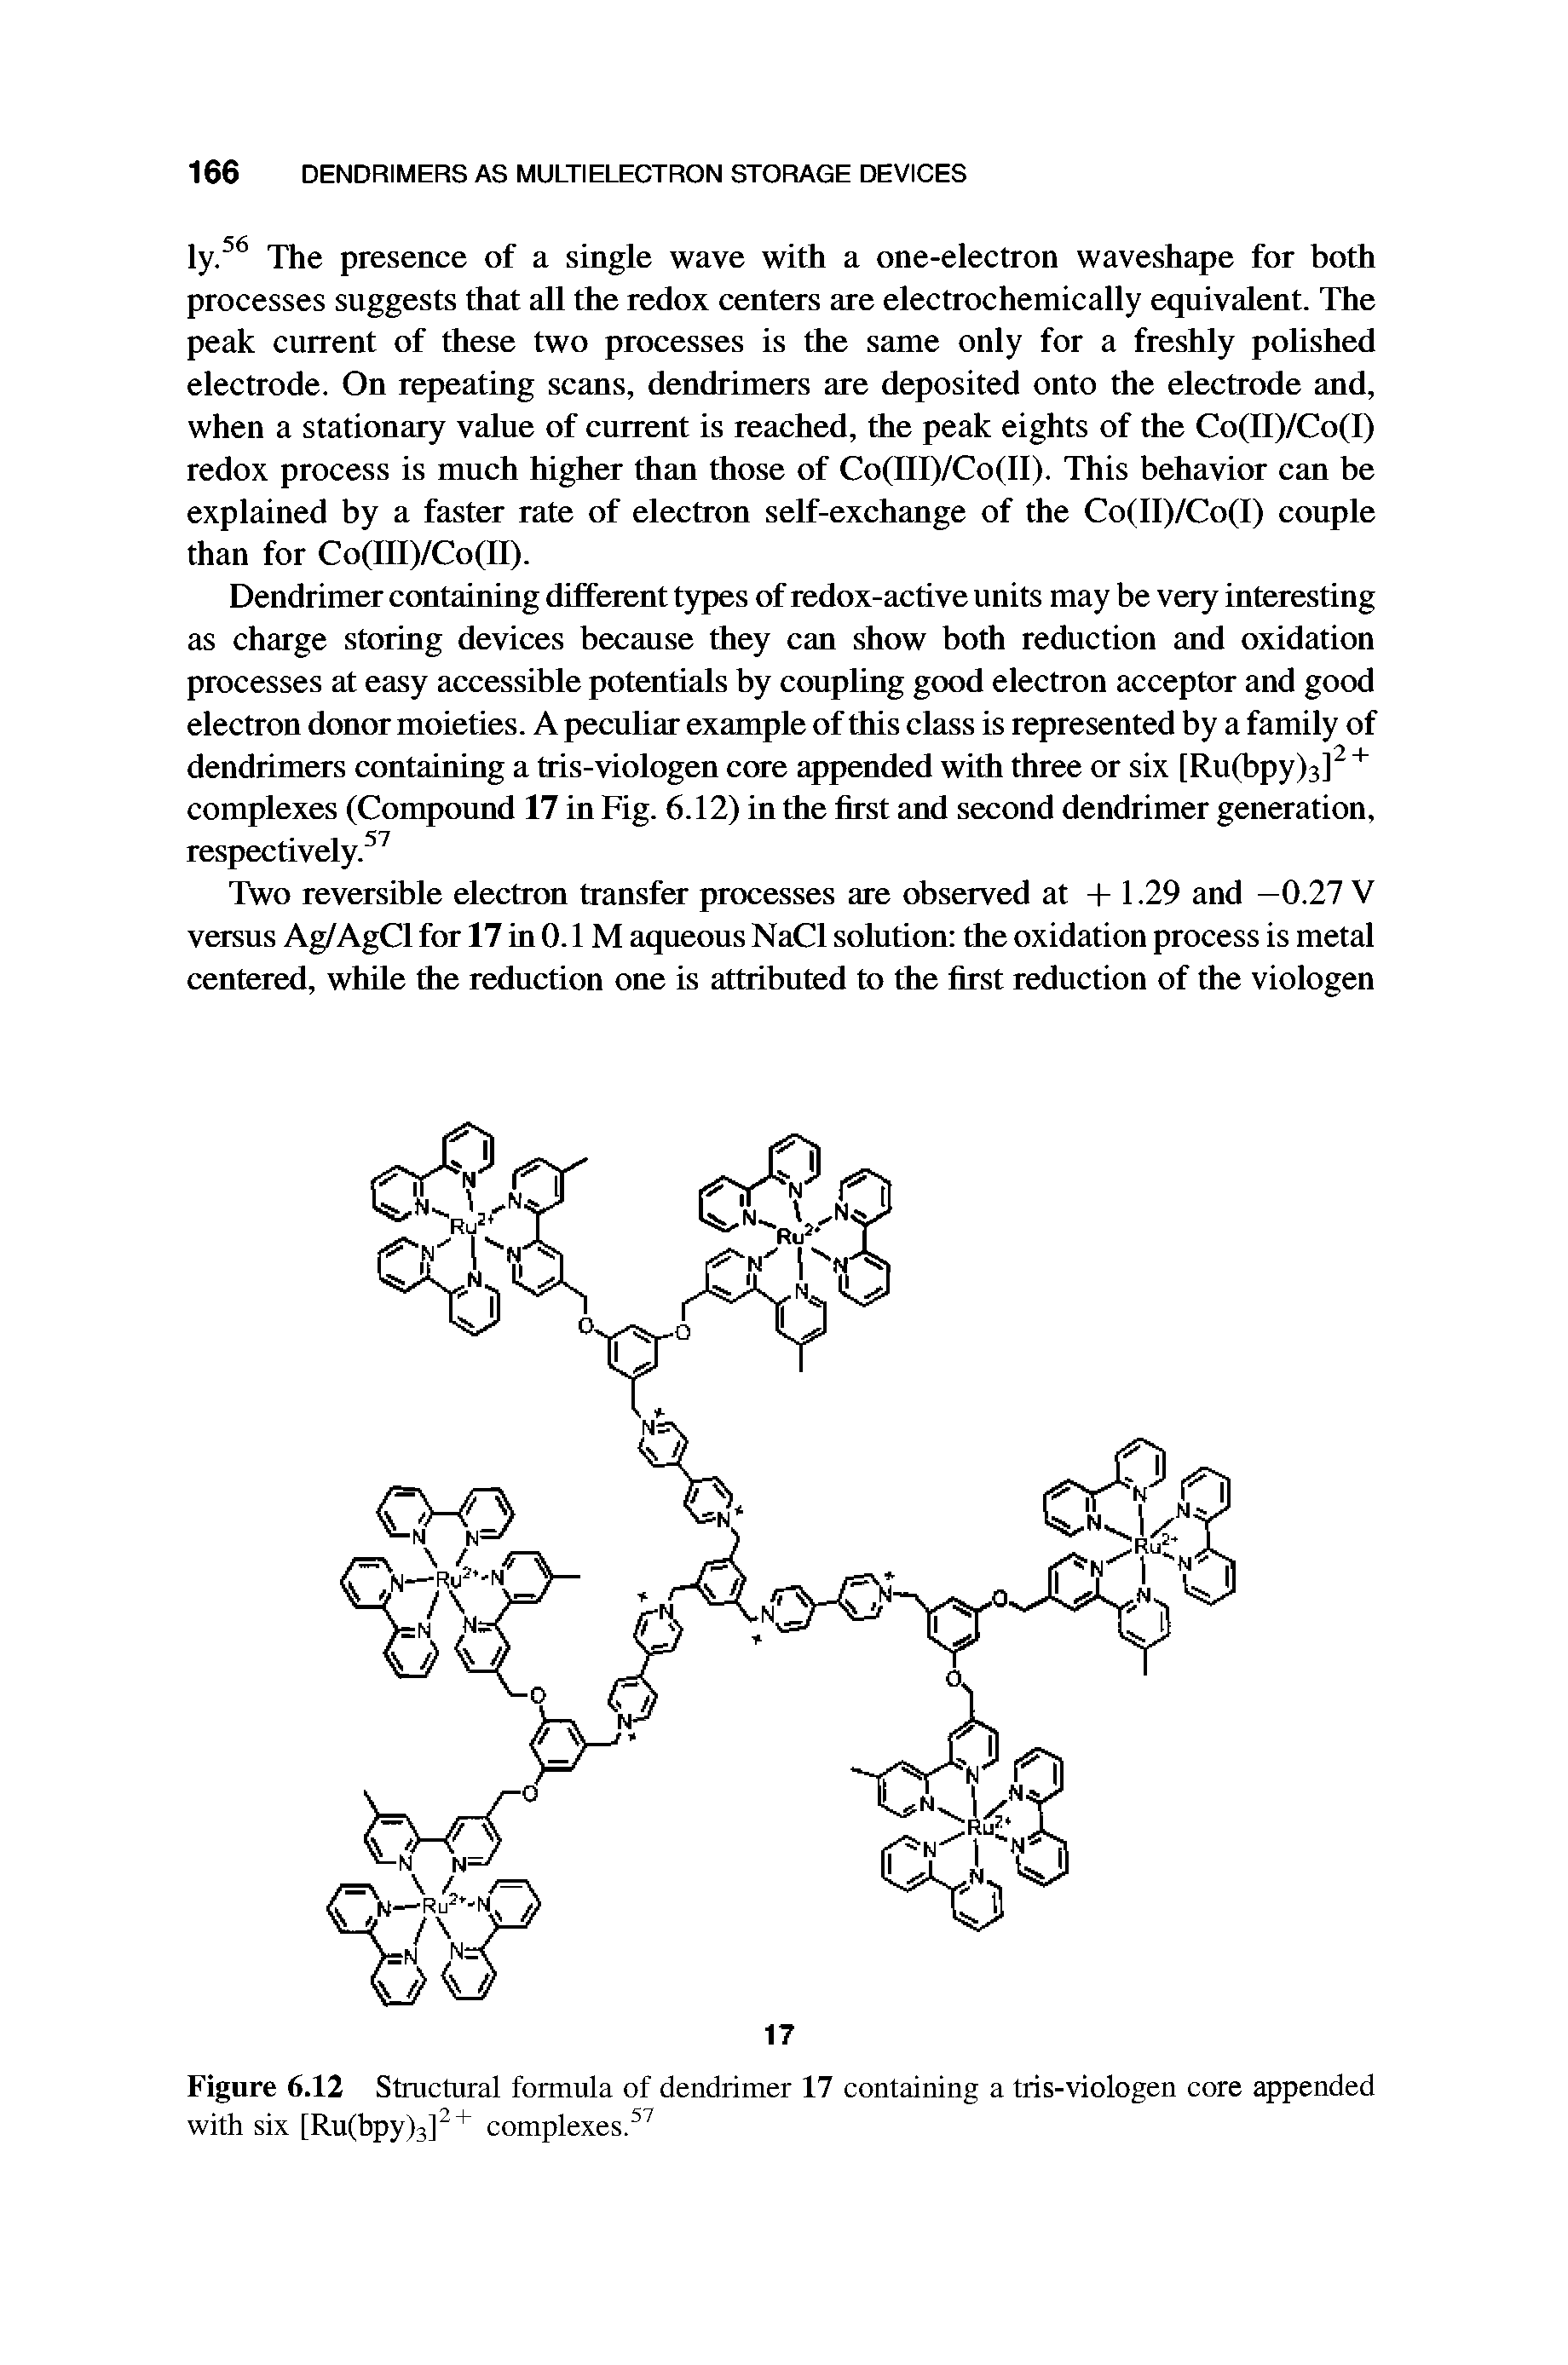 Figure 6.12 Structural formula of dendrimer 17 containing a tris-viologen core appended with six [Ru(bpy)3]2+ complexes.57...